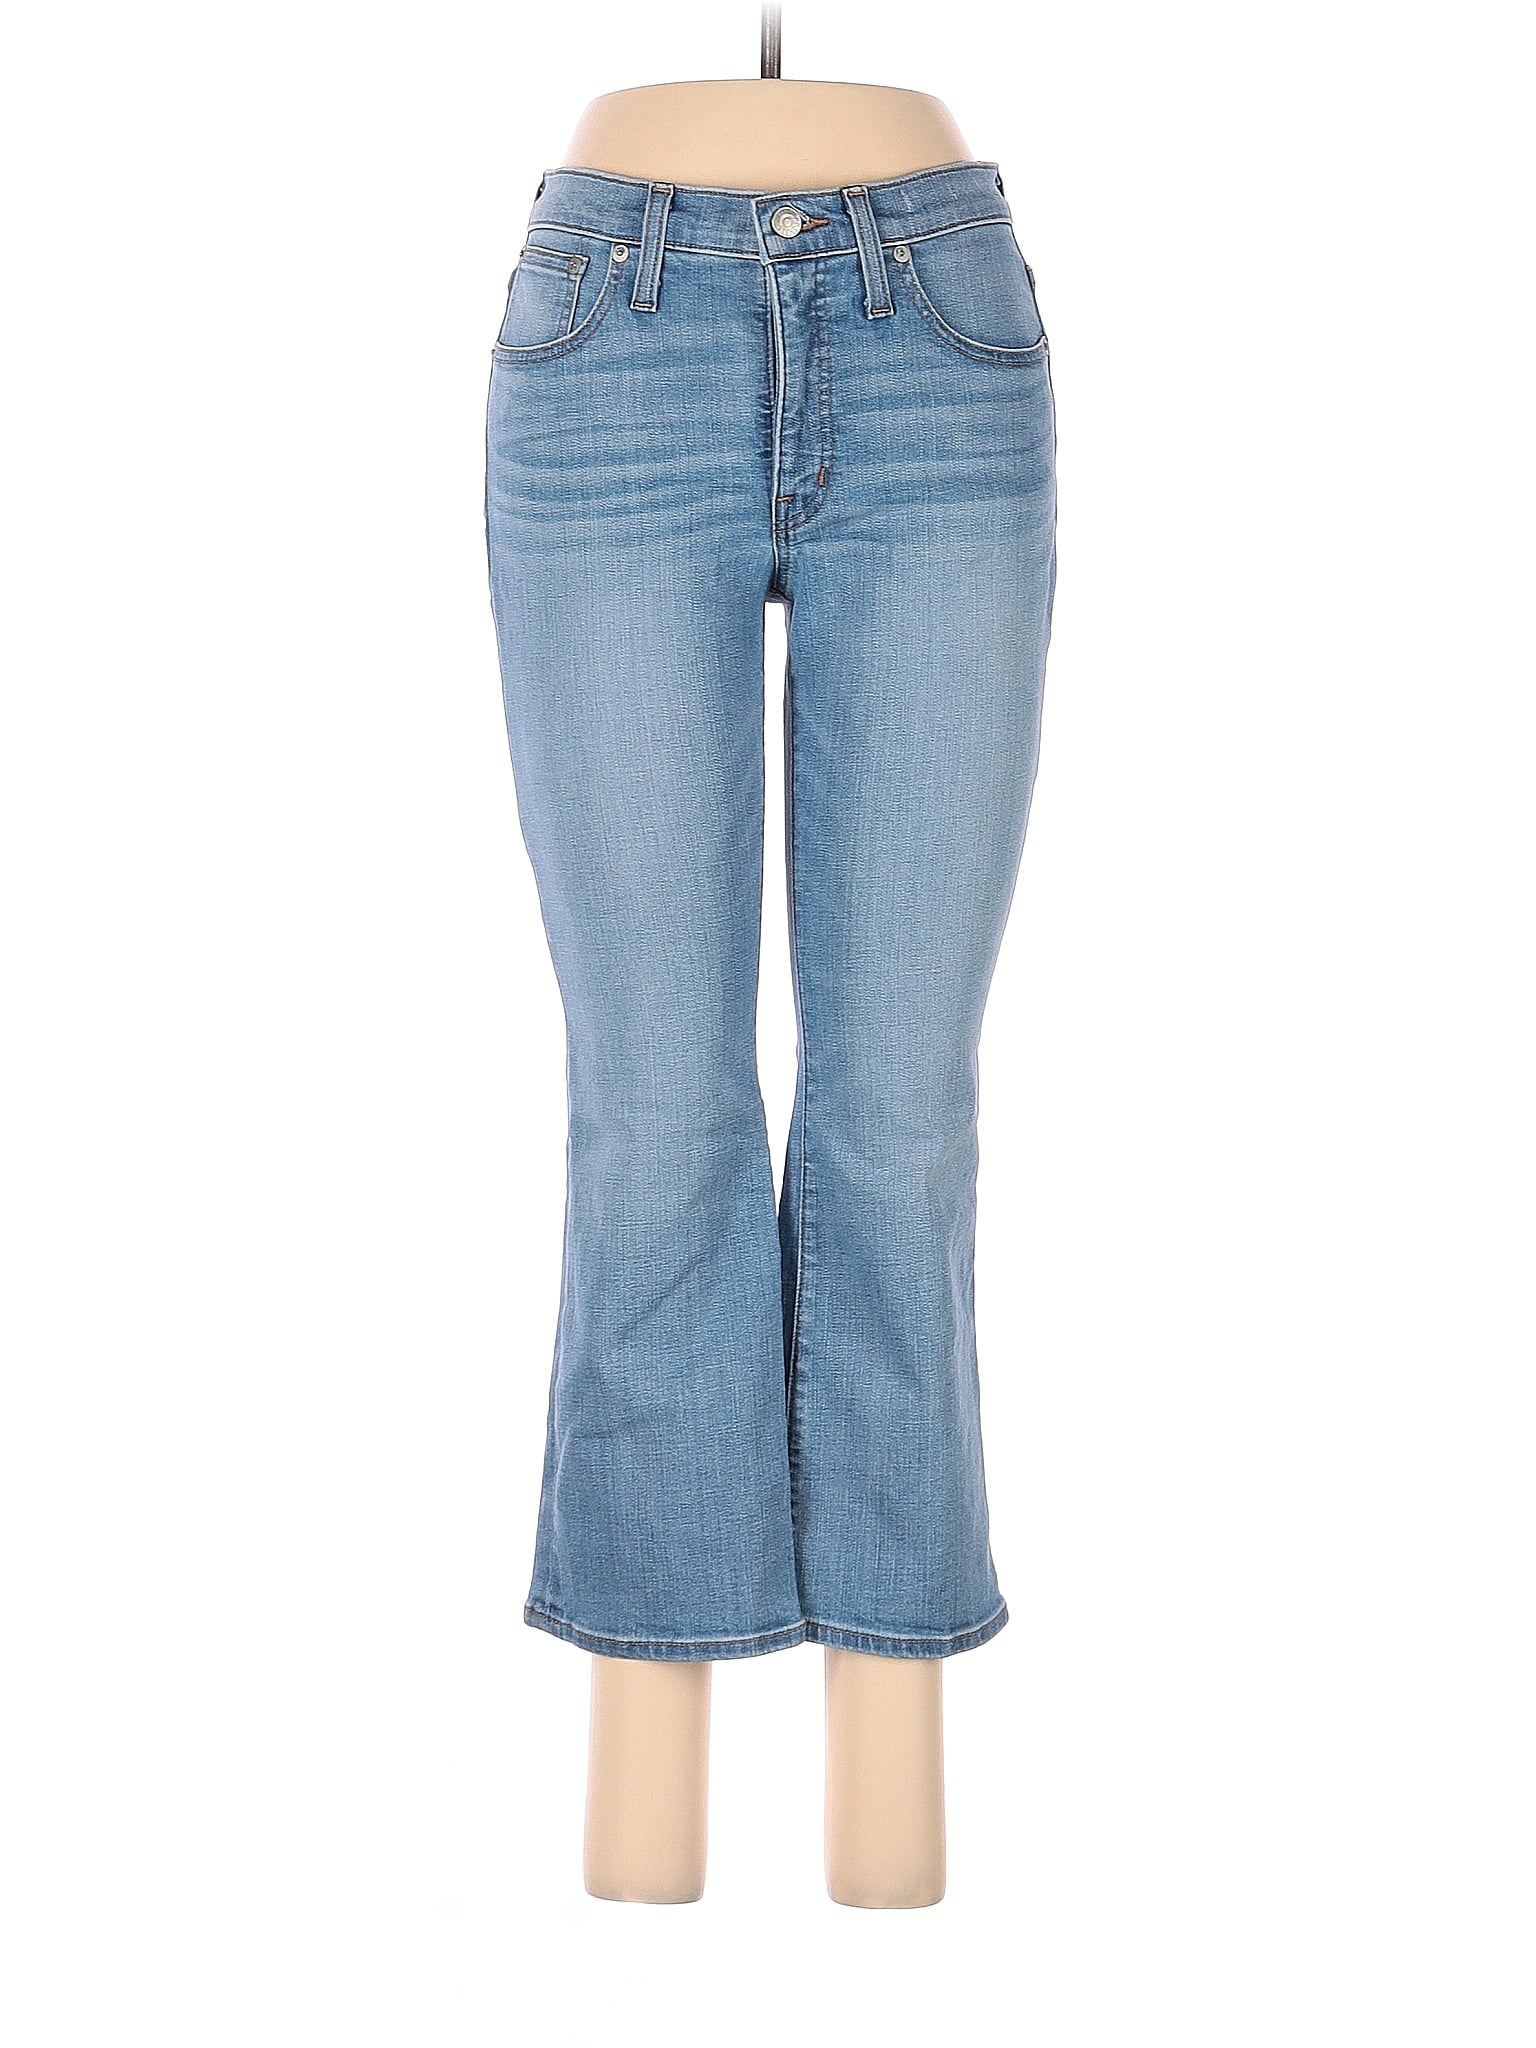 Mid-Rise Boyjeans Petite Cali Demi-Boot Jeans In Connolly Wash: Coolmax&reg; Denim Edition in Light Wash waist size - 27 P